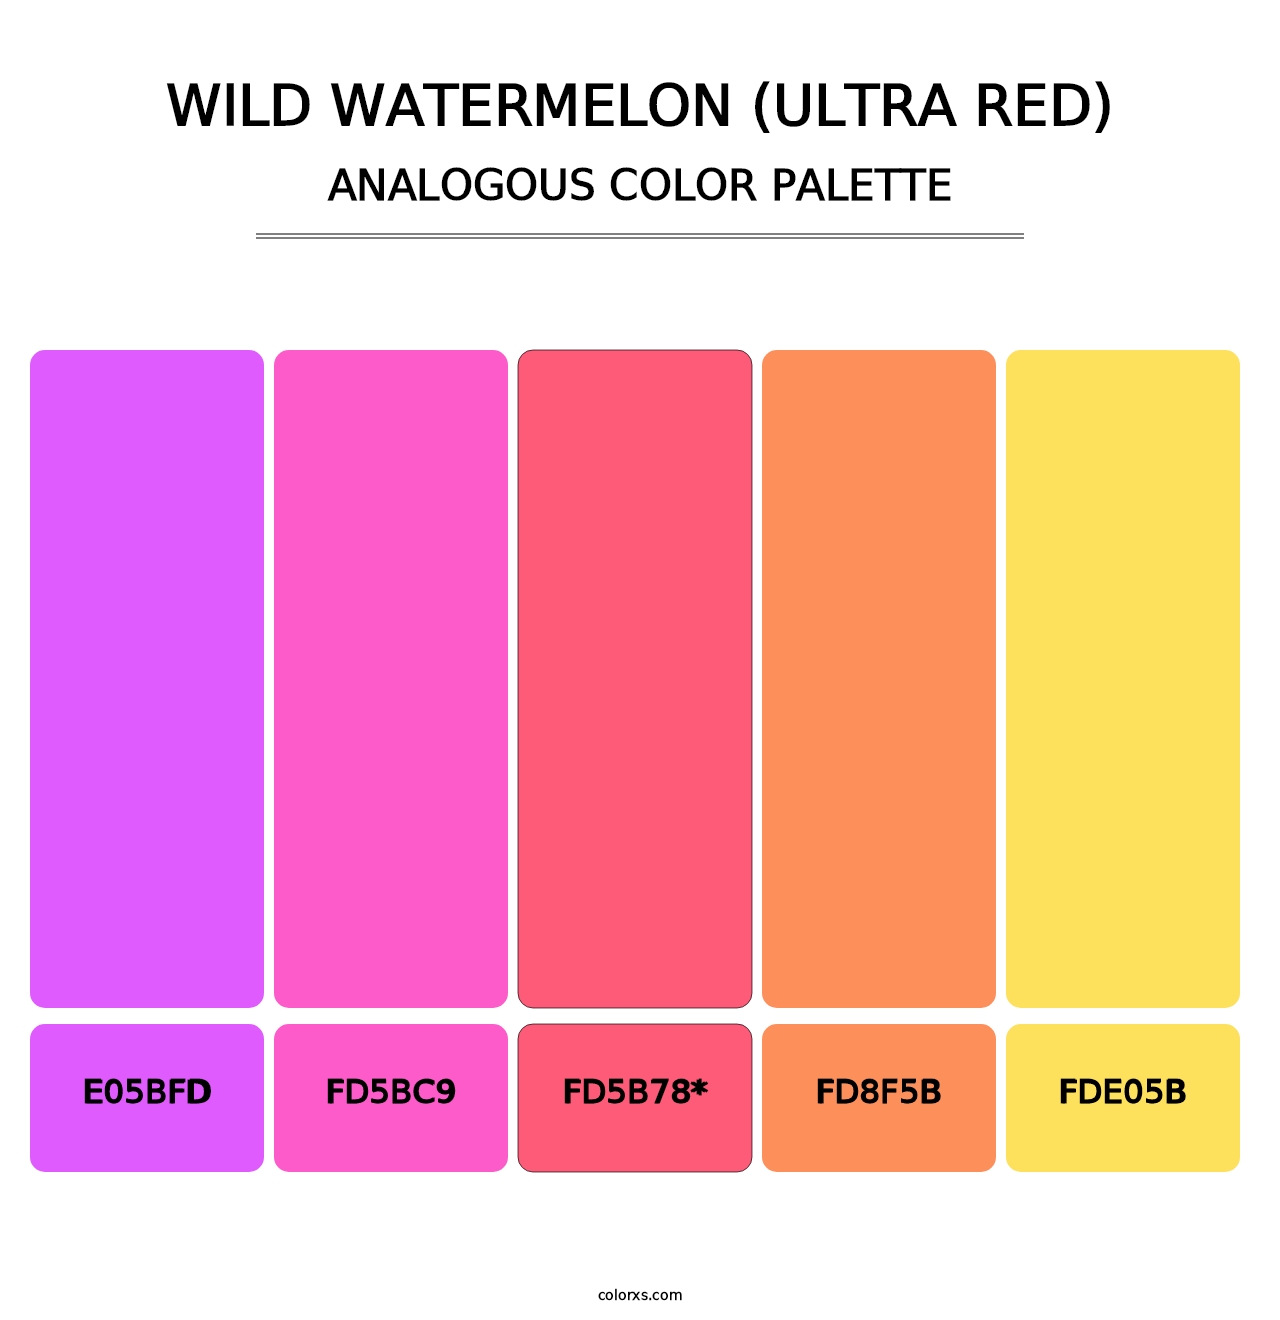 Wild Watermelon (Ultra Red) - Analogous Color Palette